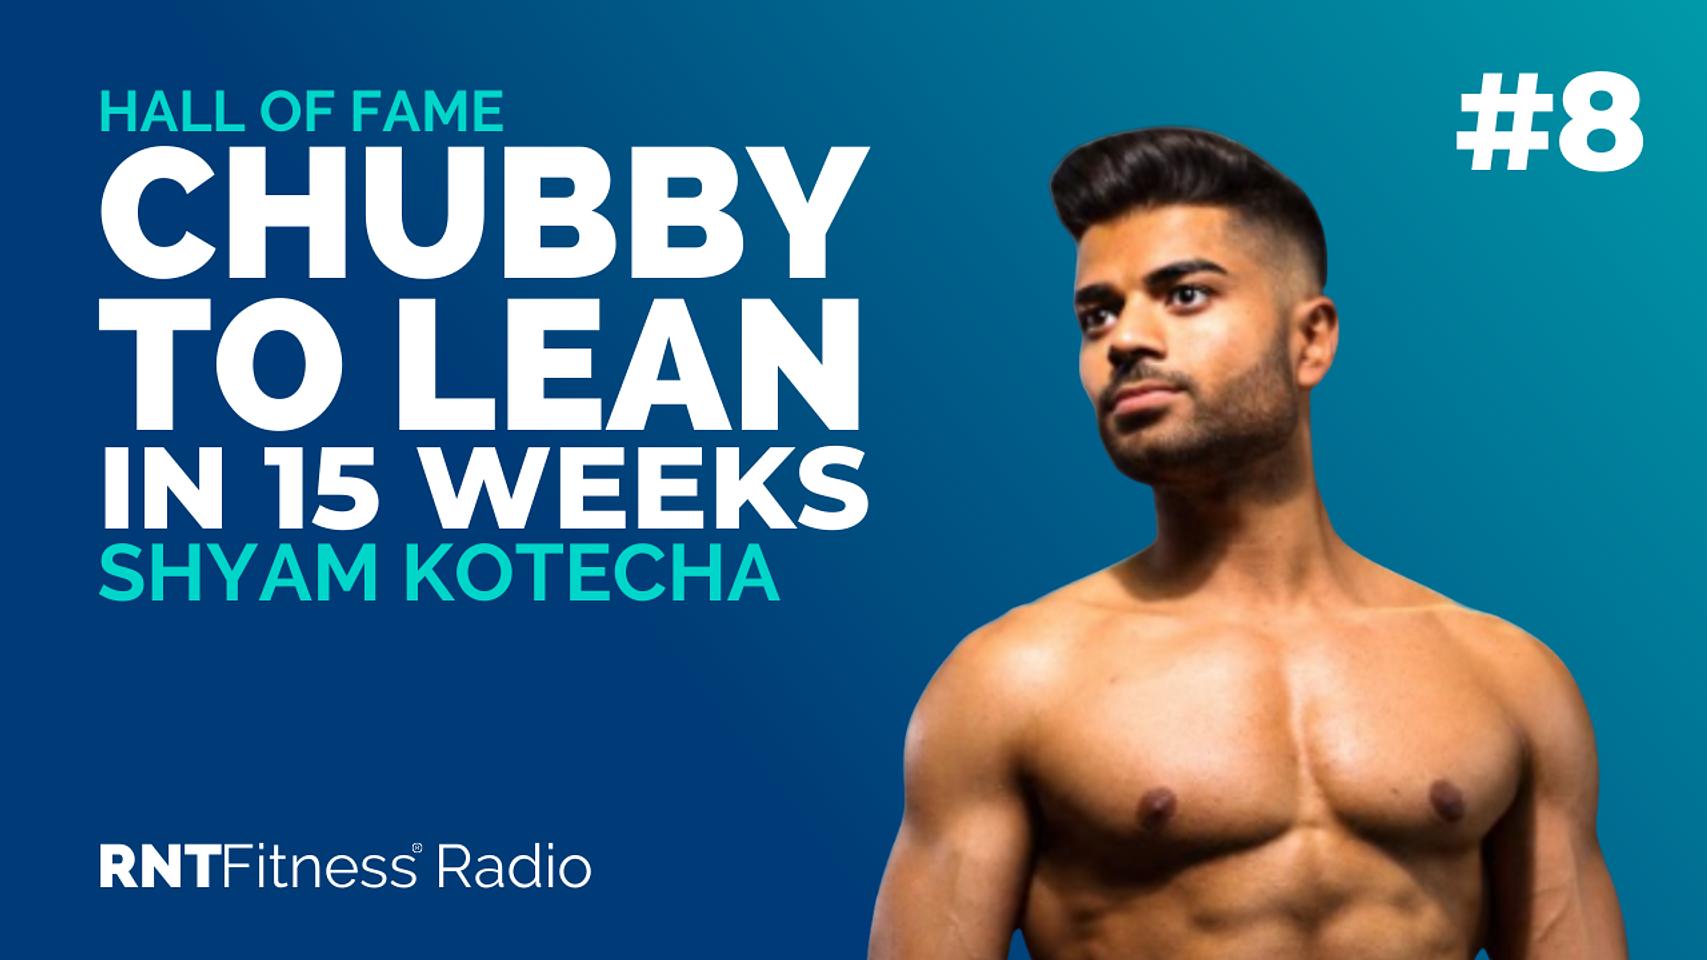 Ep. 08 - Hall of Fame | Shyam Kotecha - How He Went from Chubby City Worker to Photoshoot Lean in 15 Weeks